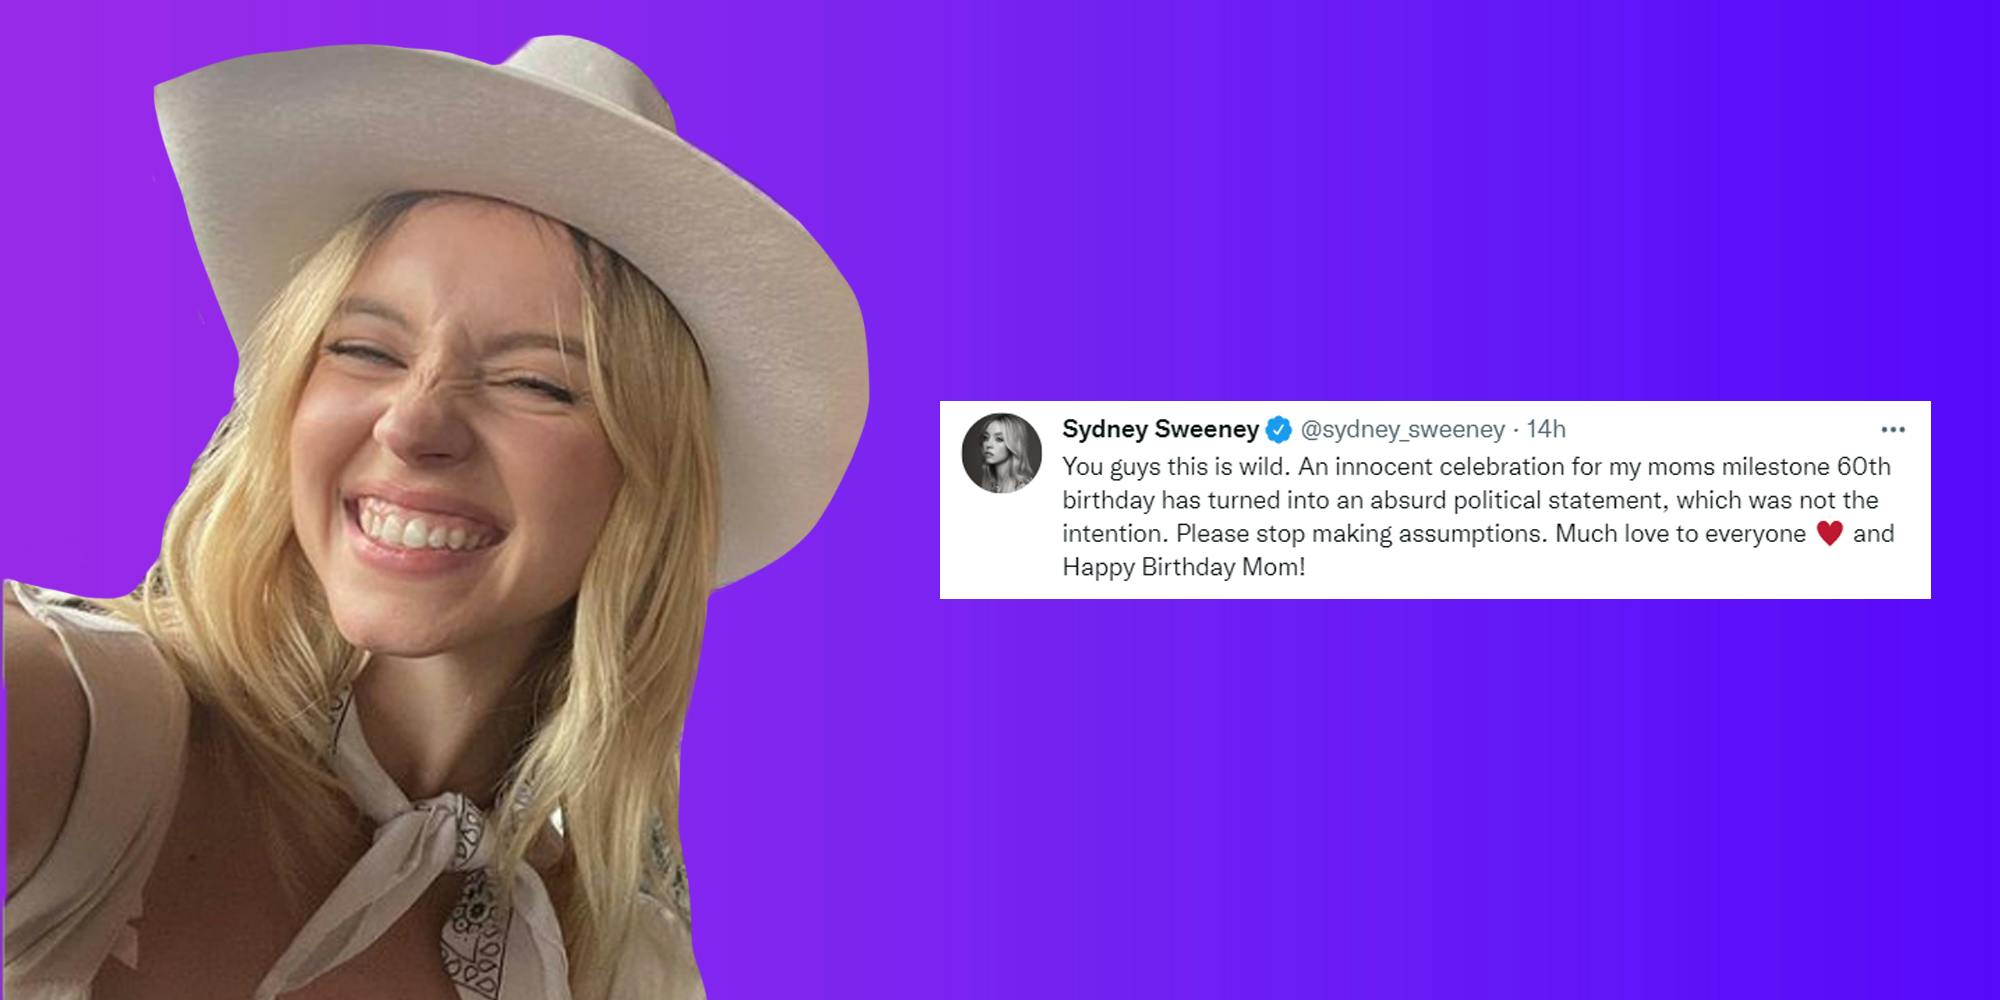 Sydney Sweeney in cowgirl hat on left with tweet on right caption "You guys this is wild. An innocent celebration for my moms milestone 60th birthday has turned into an absurd political statement, which was not the intention. Please stop making assumptions. Much love to everyone and Happy Birthday Mom!" on purple blue gradient background